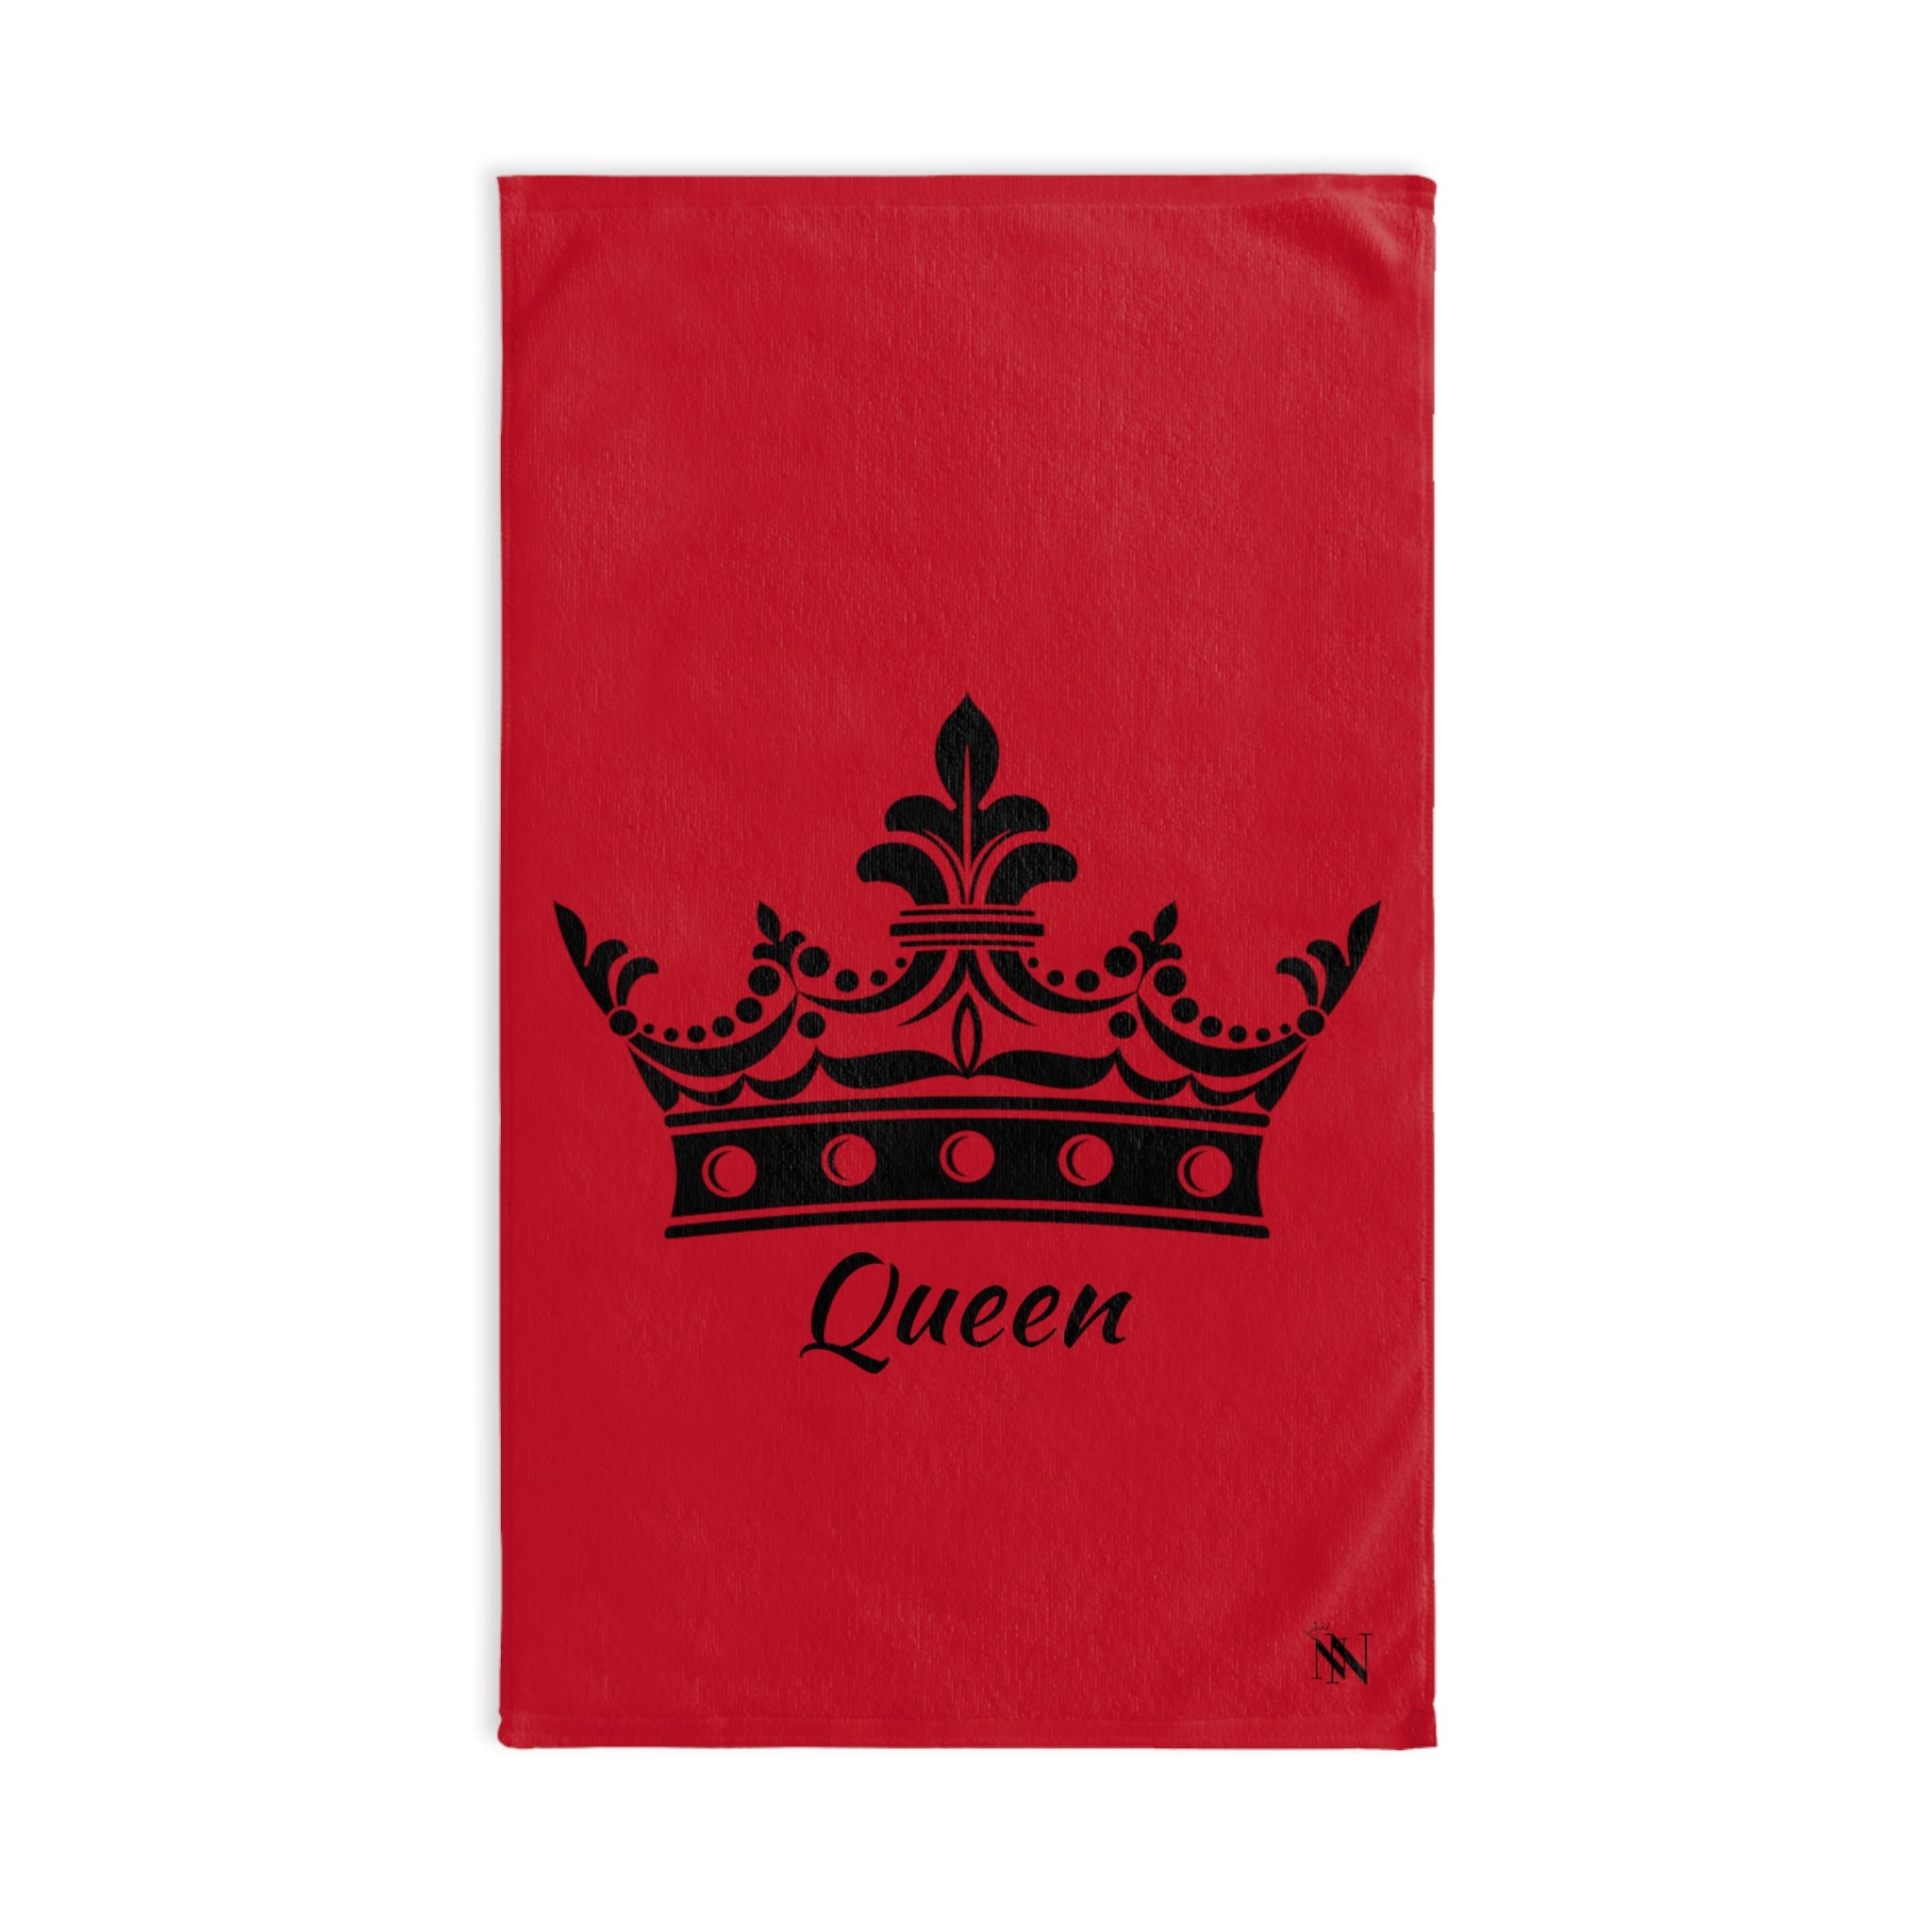 Queen Tiara CrownRed | Sexy Gifts for Boyfriend, Funny Towel Romantic Gift for Wedding Couple Fiance First Year 2nd Anniversary Valentines, Party Gag Gifts, Joke Humor Cloth for Husband Men BF NECTAR NAPKINS